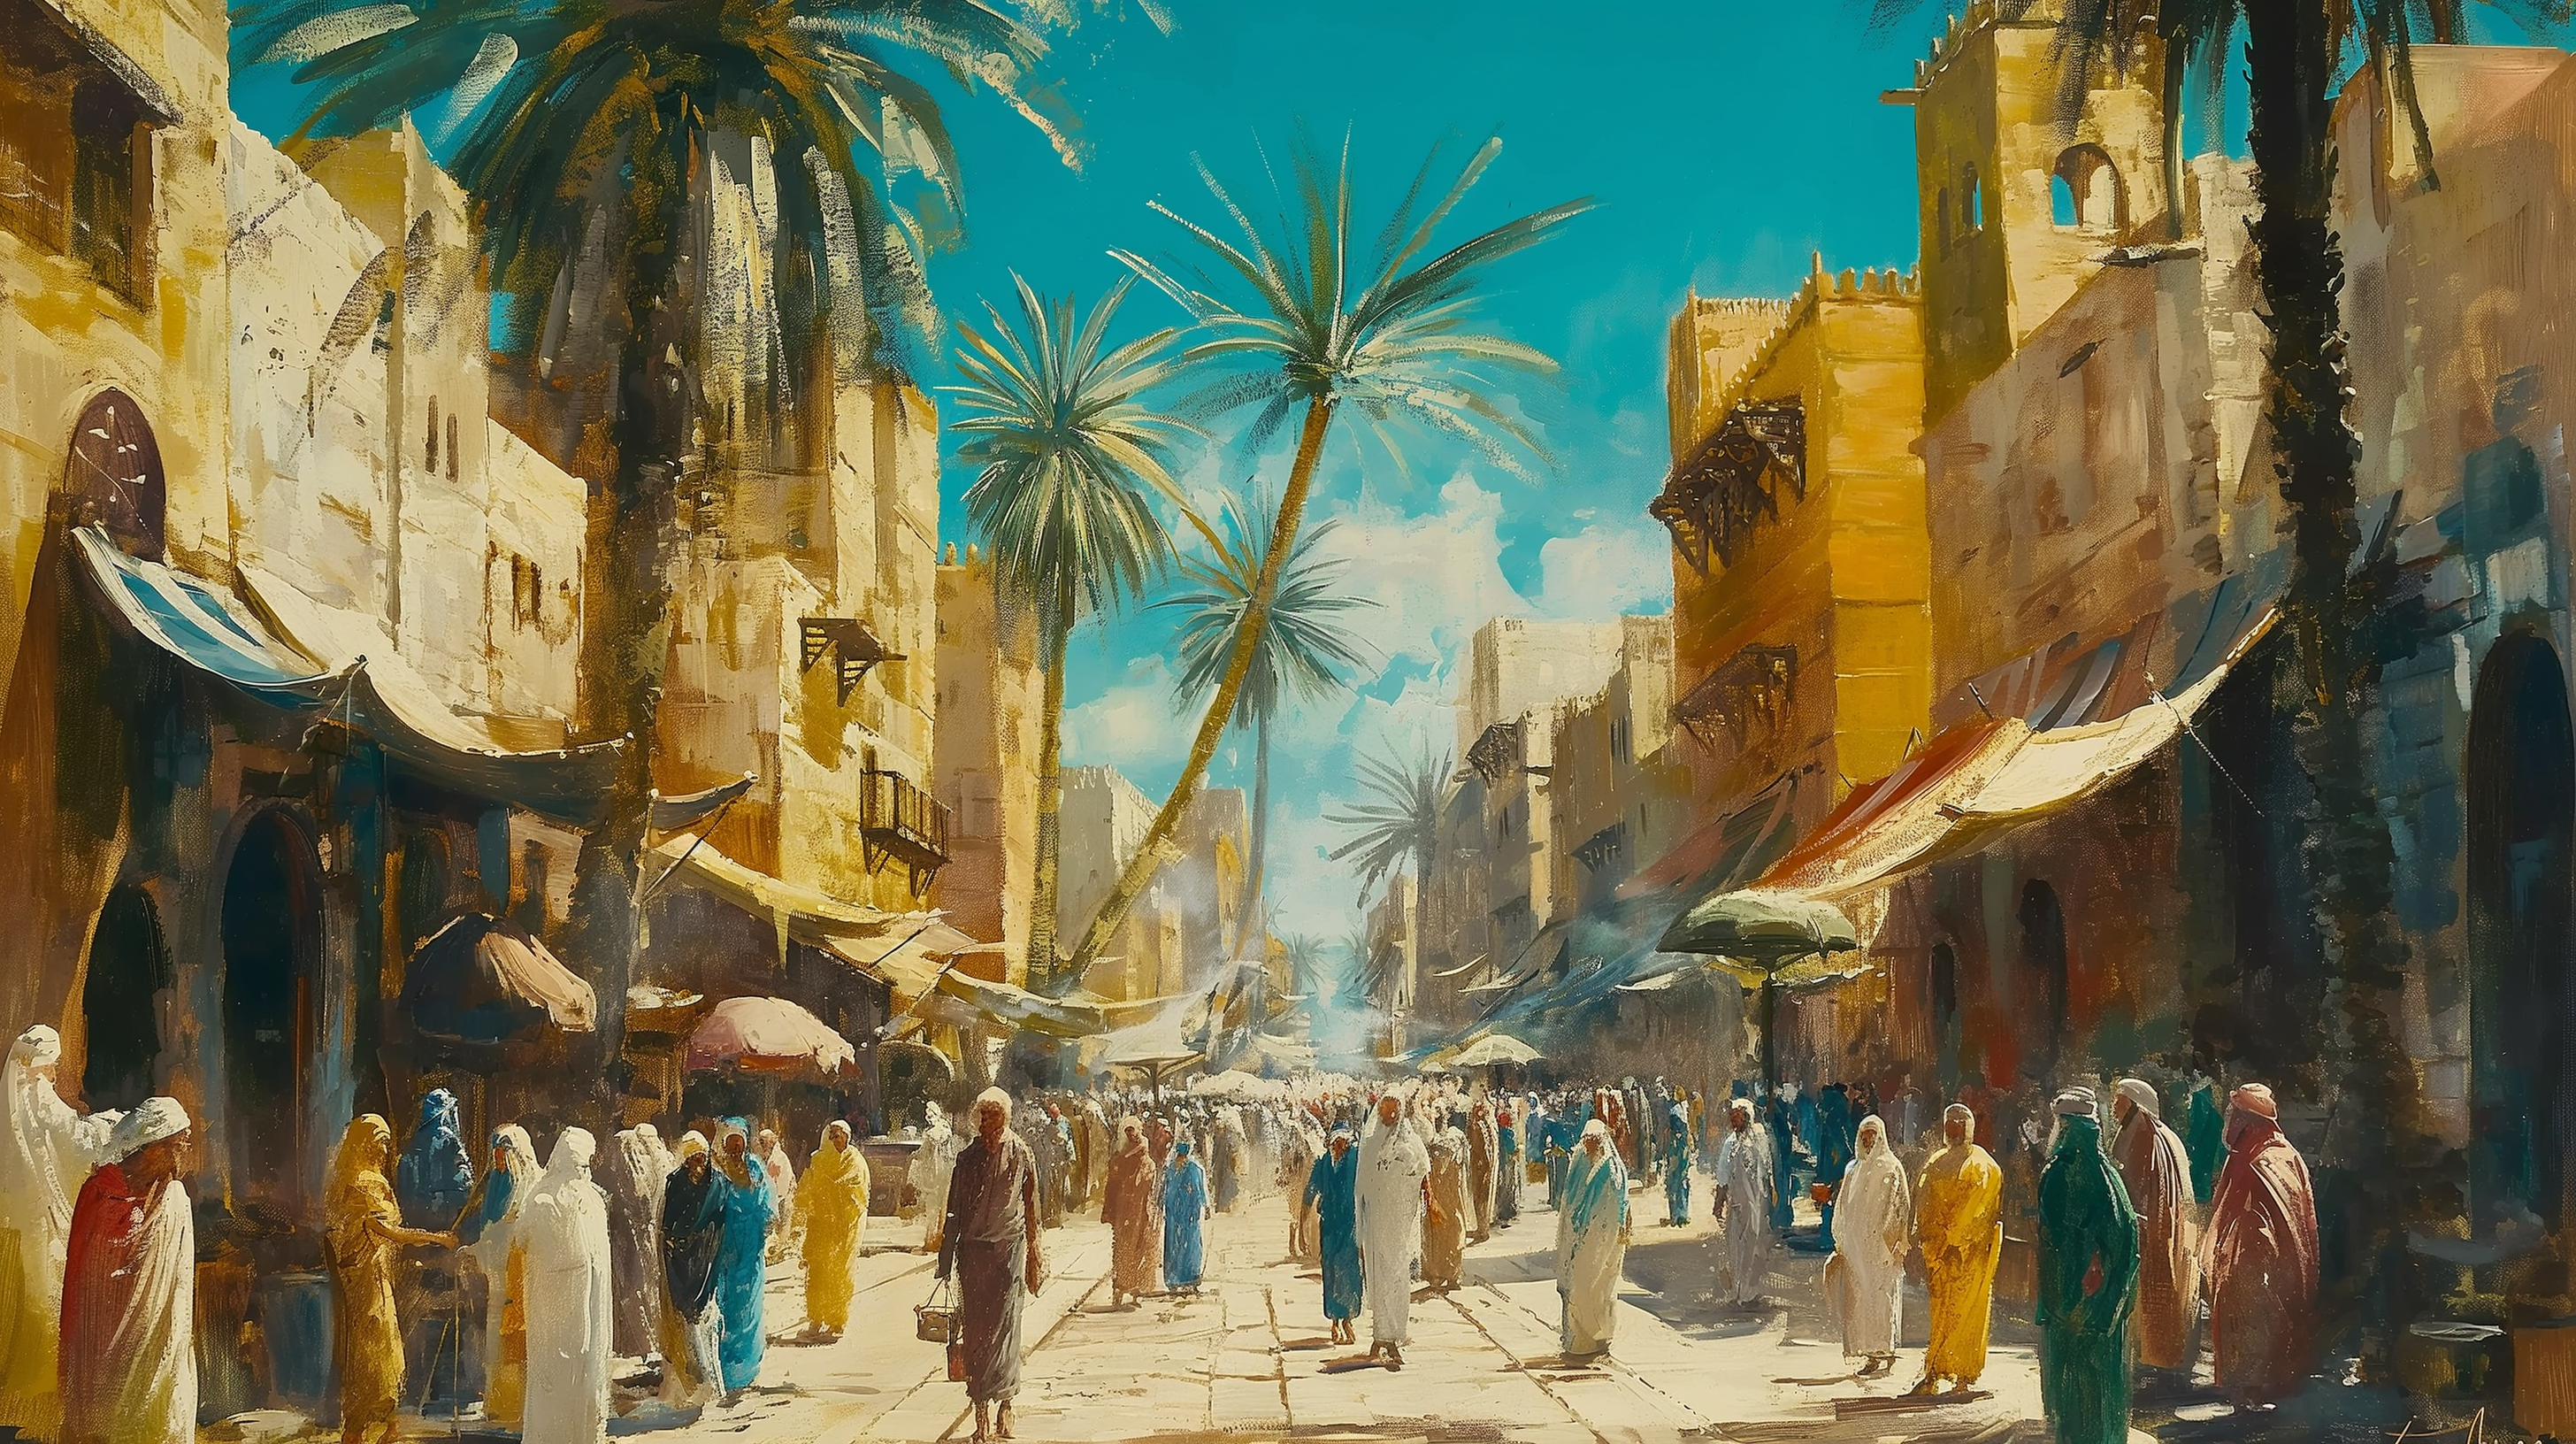 An oil painting representing the streets of early christianity days